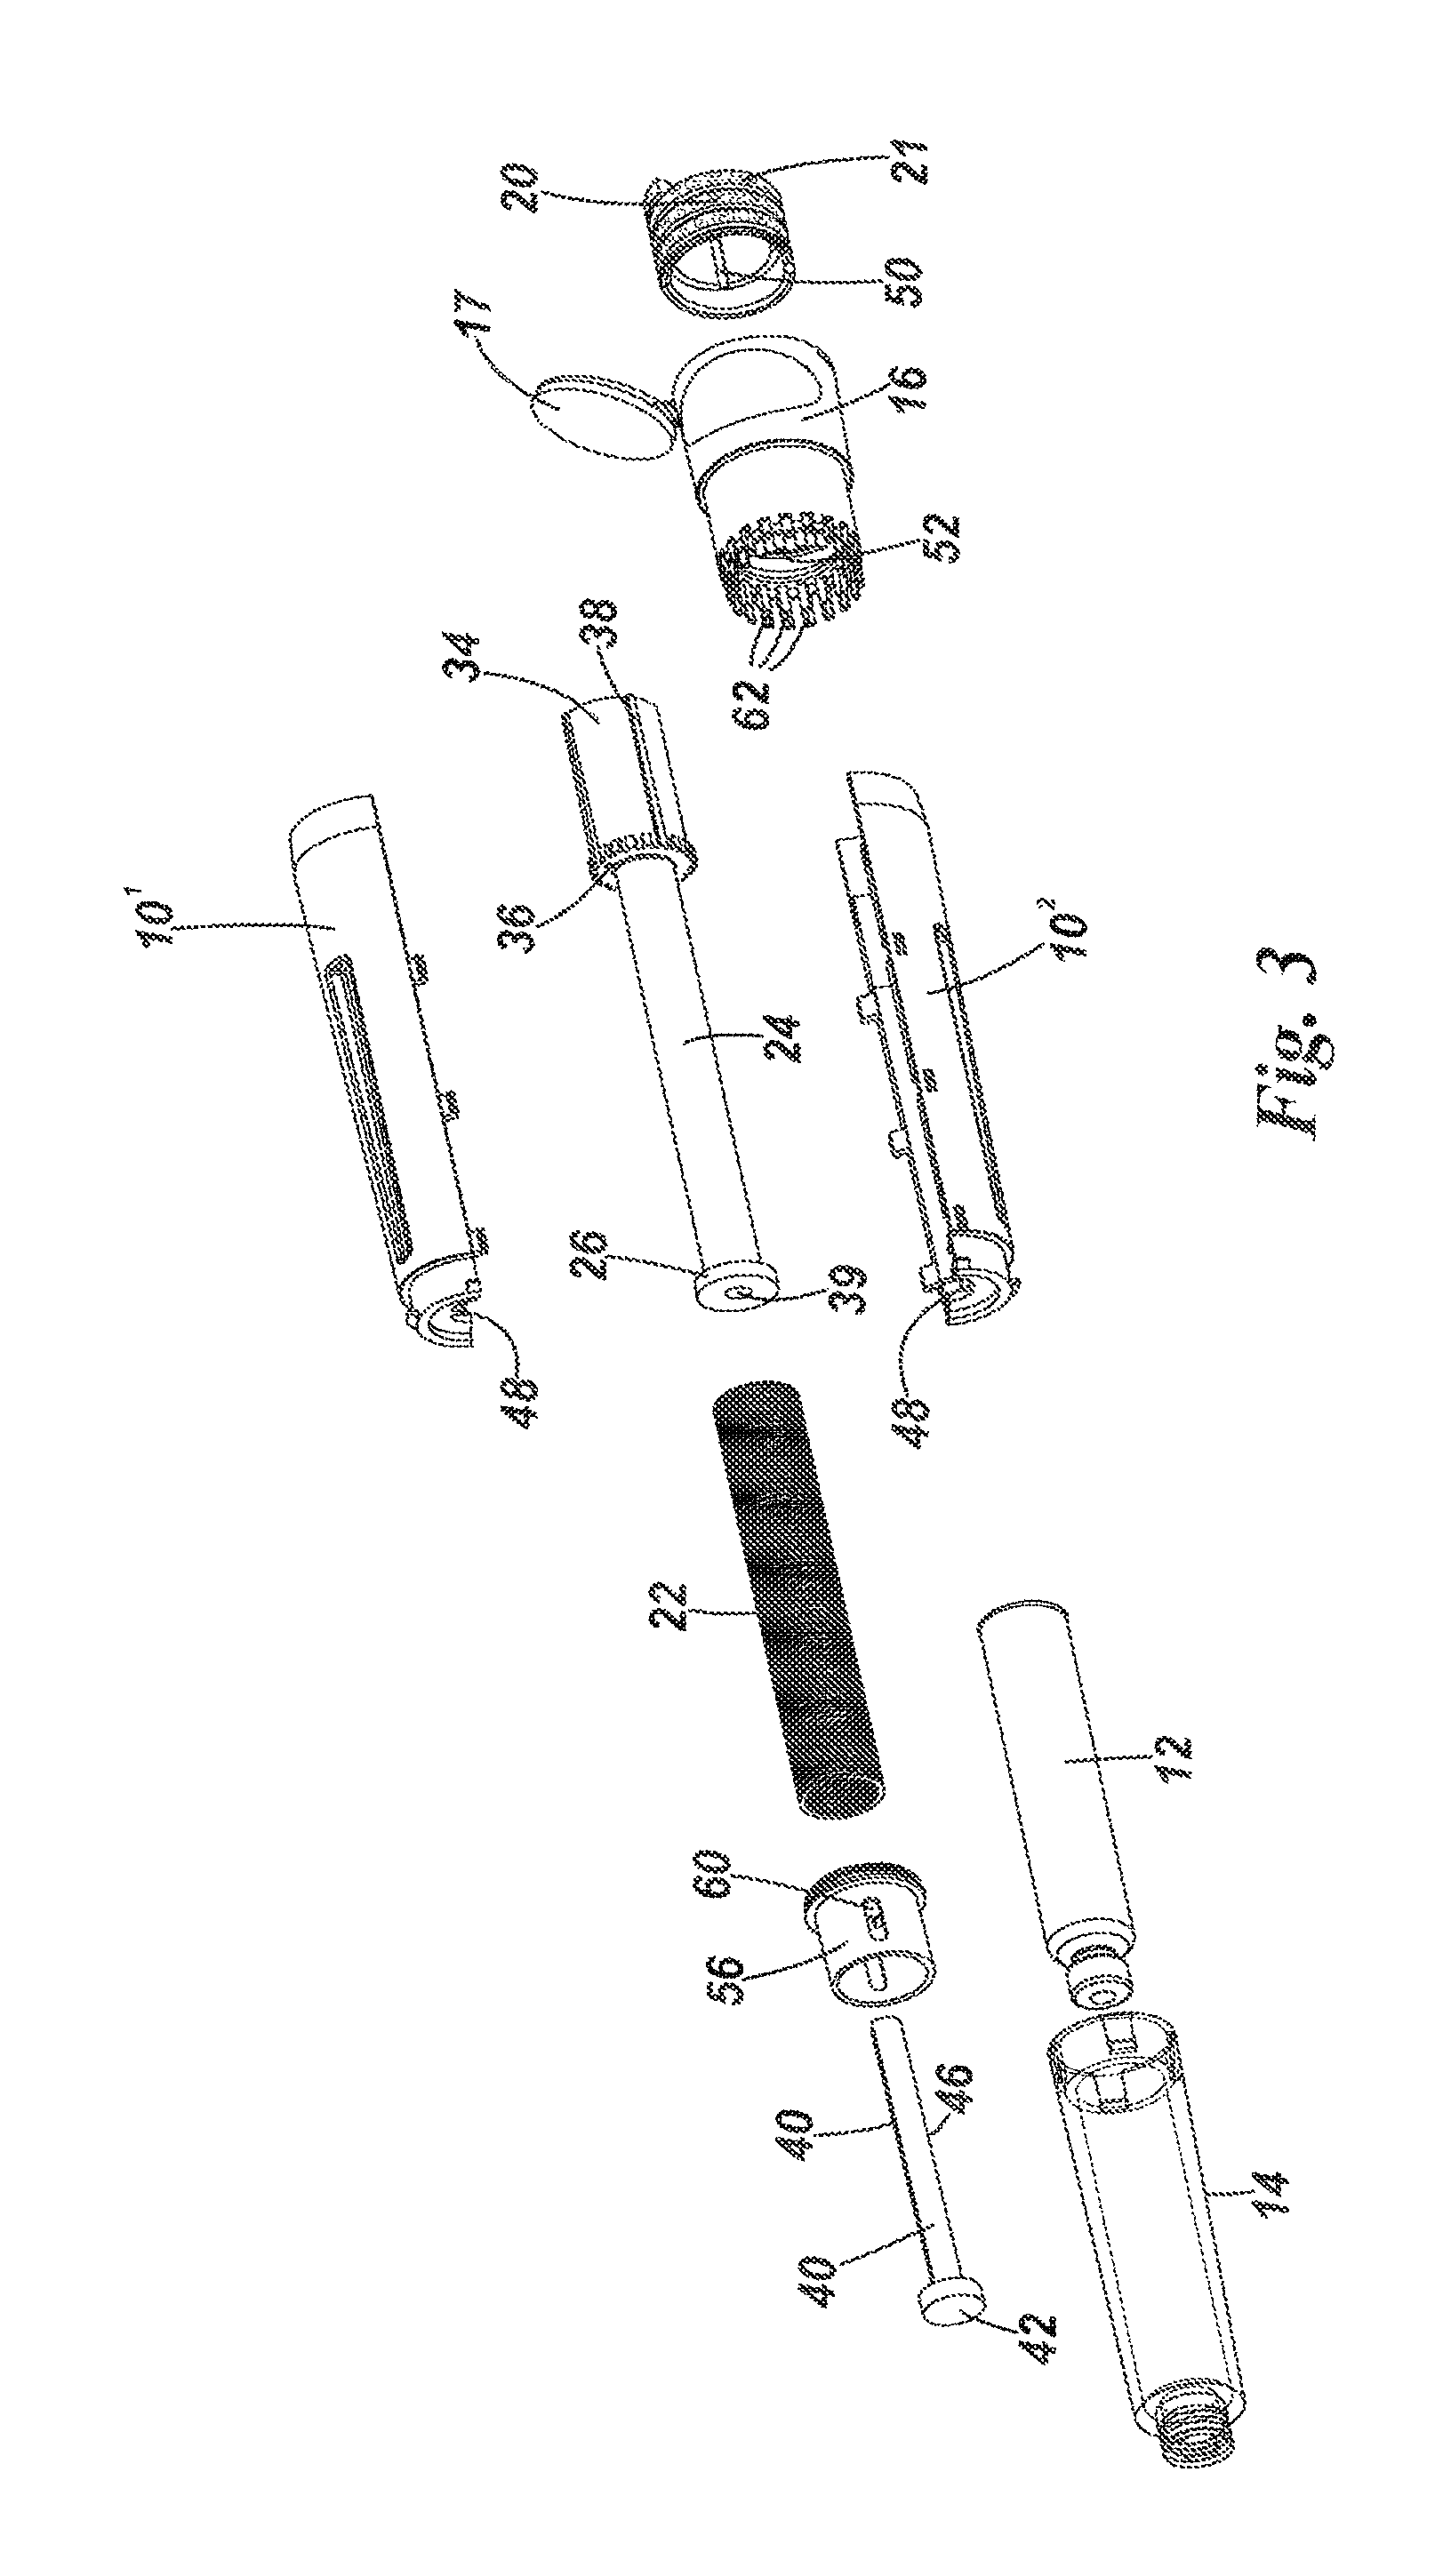 Injector apparatus having a clutch to inhibit forward movement of the plunger